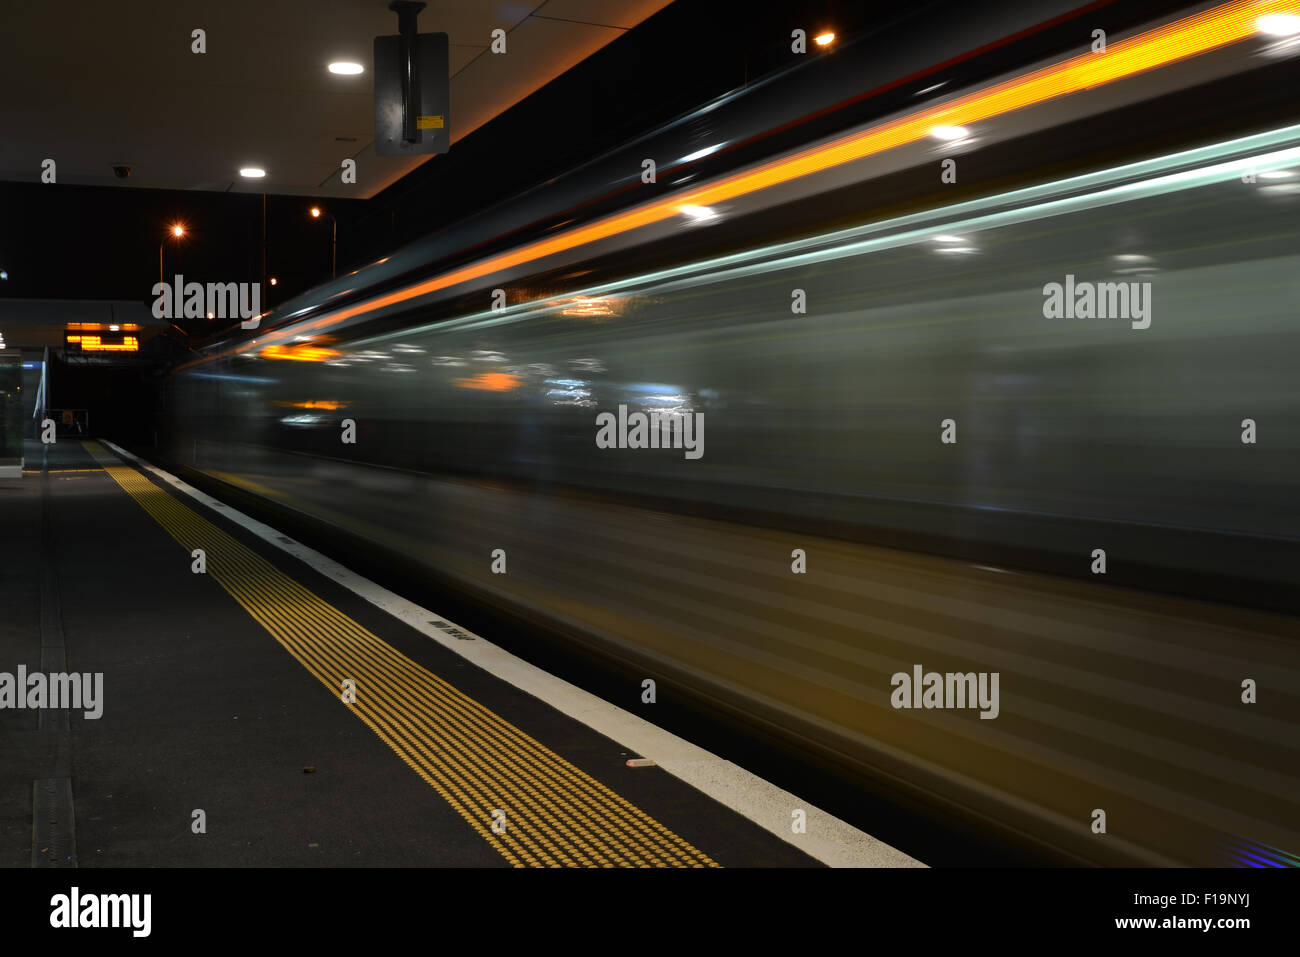 Time exposure as a commuter train leaves a suburban train station in the evening Stock Photo